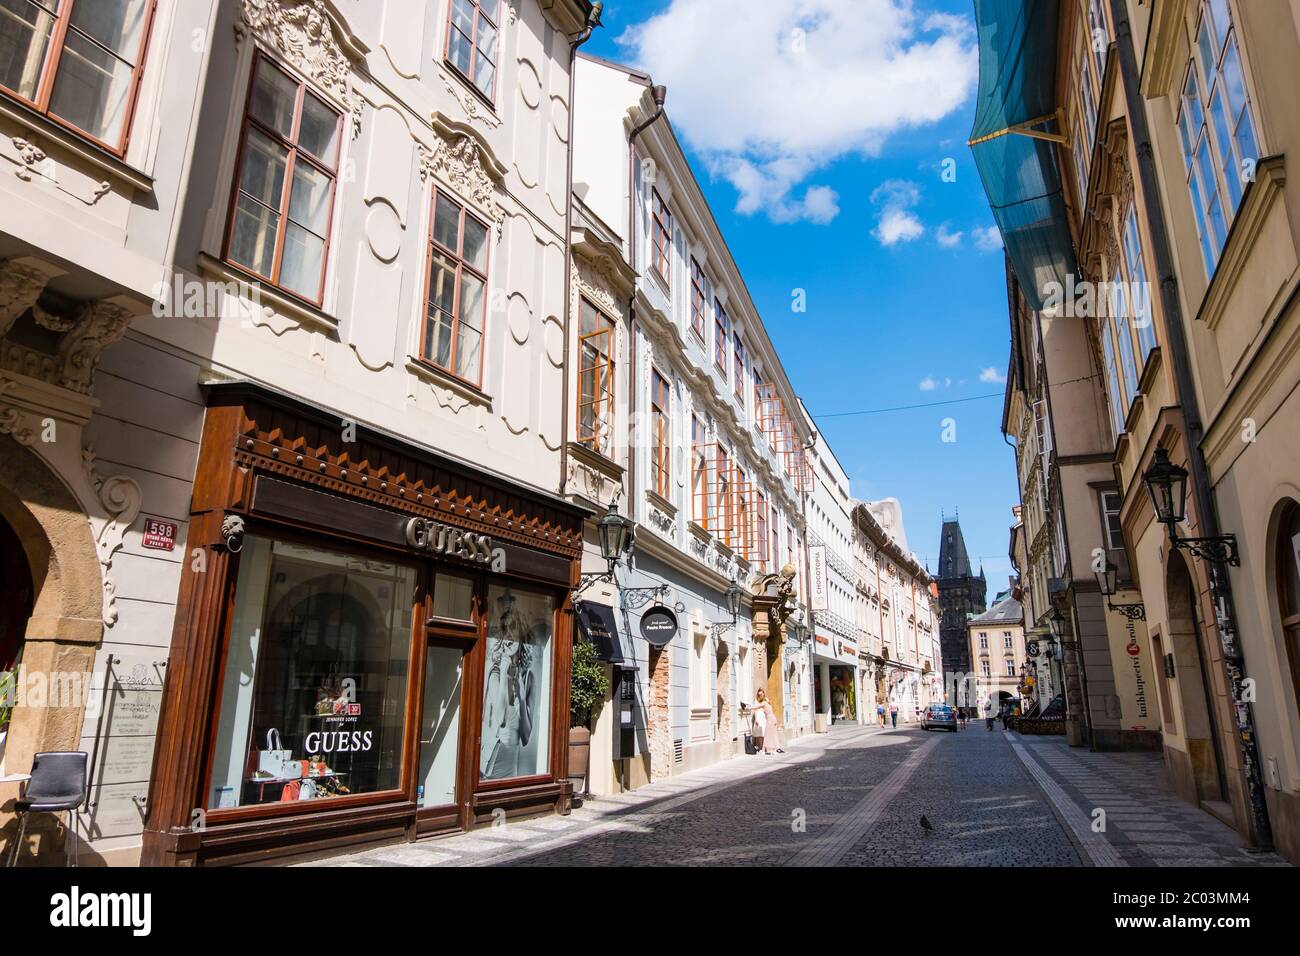 Celetna, Prague High Resolution Stock Photography and Images - Alamy